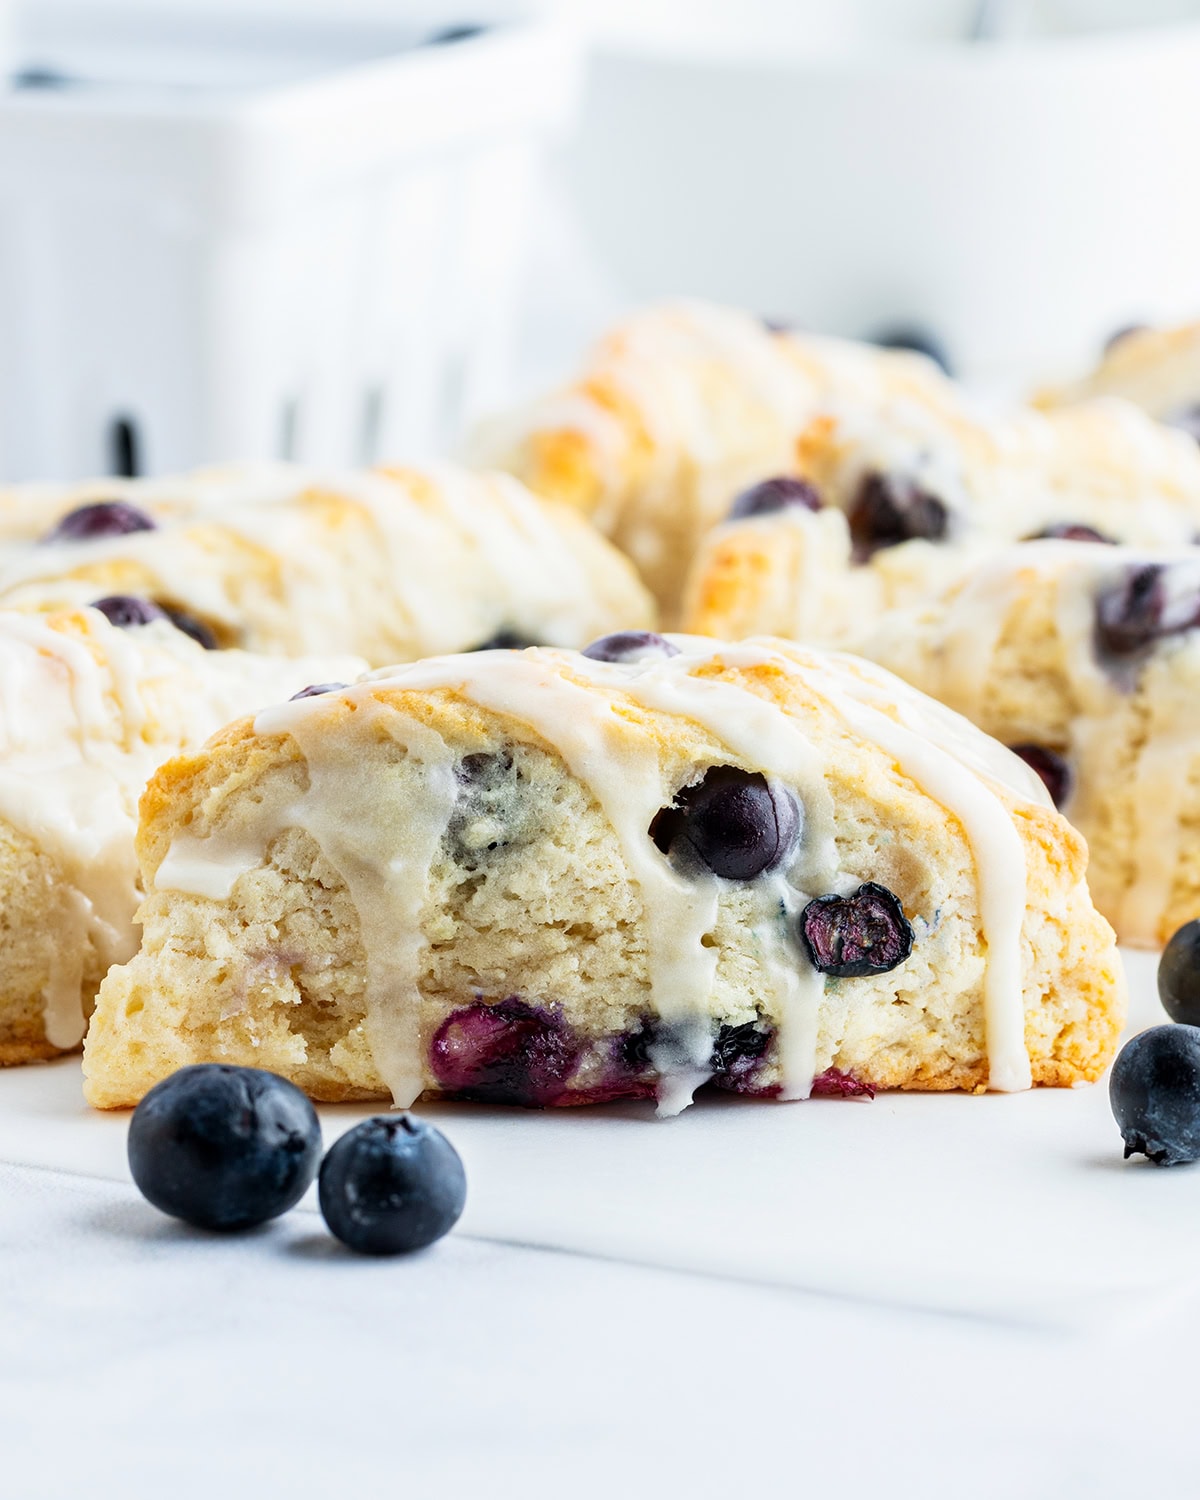 A blueberry scone with vanilla icing on top.